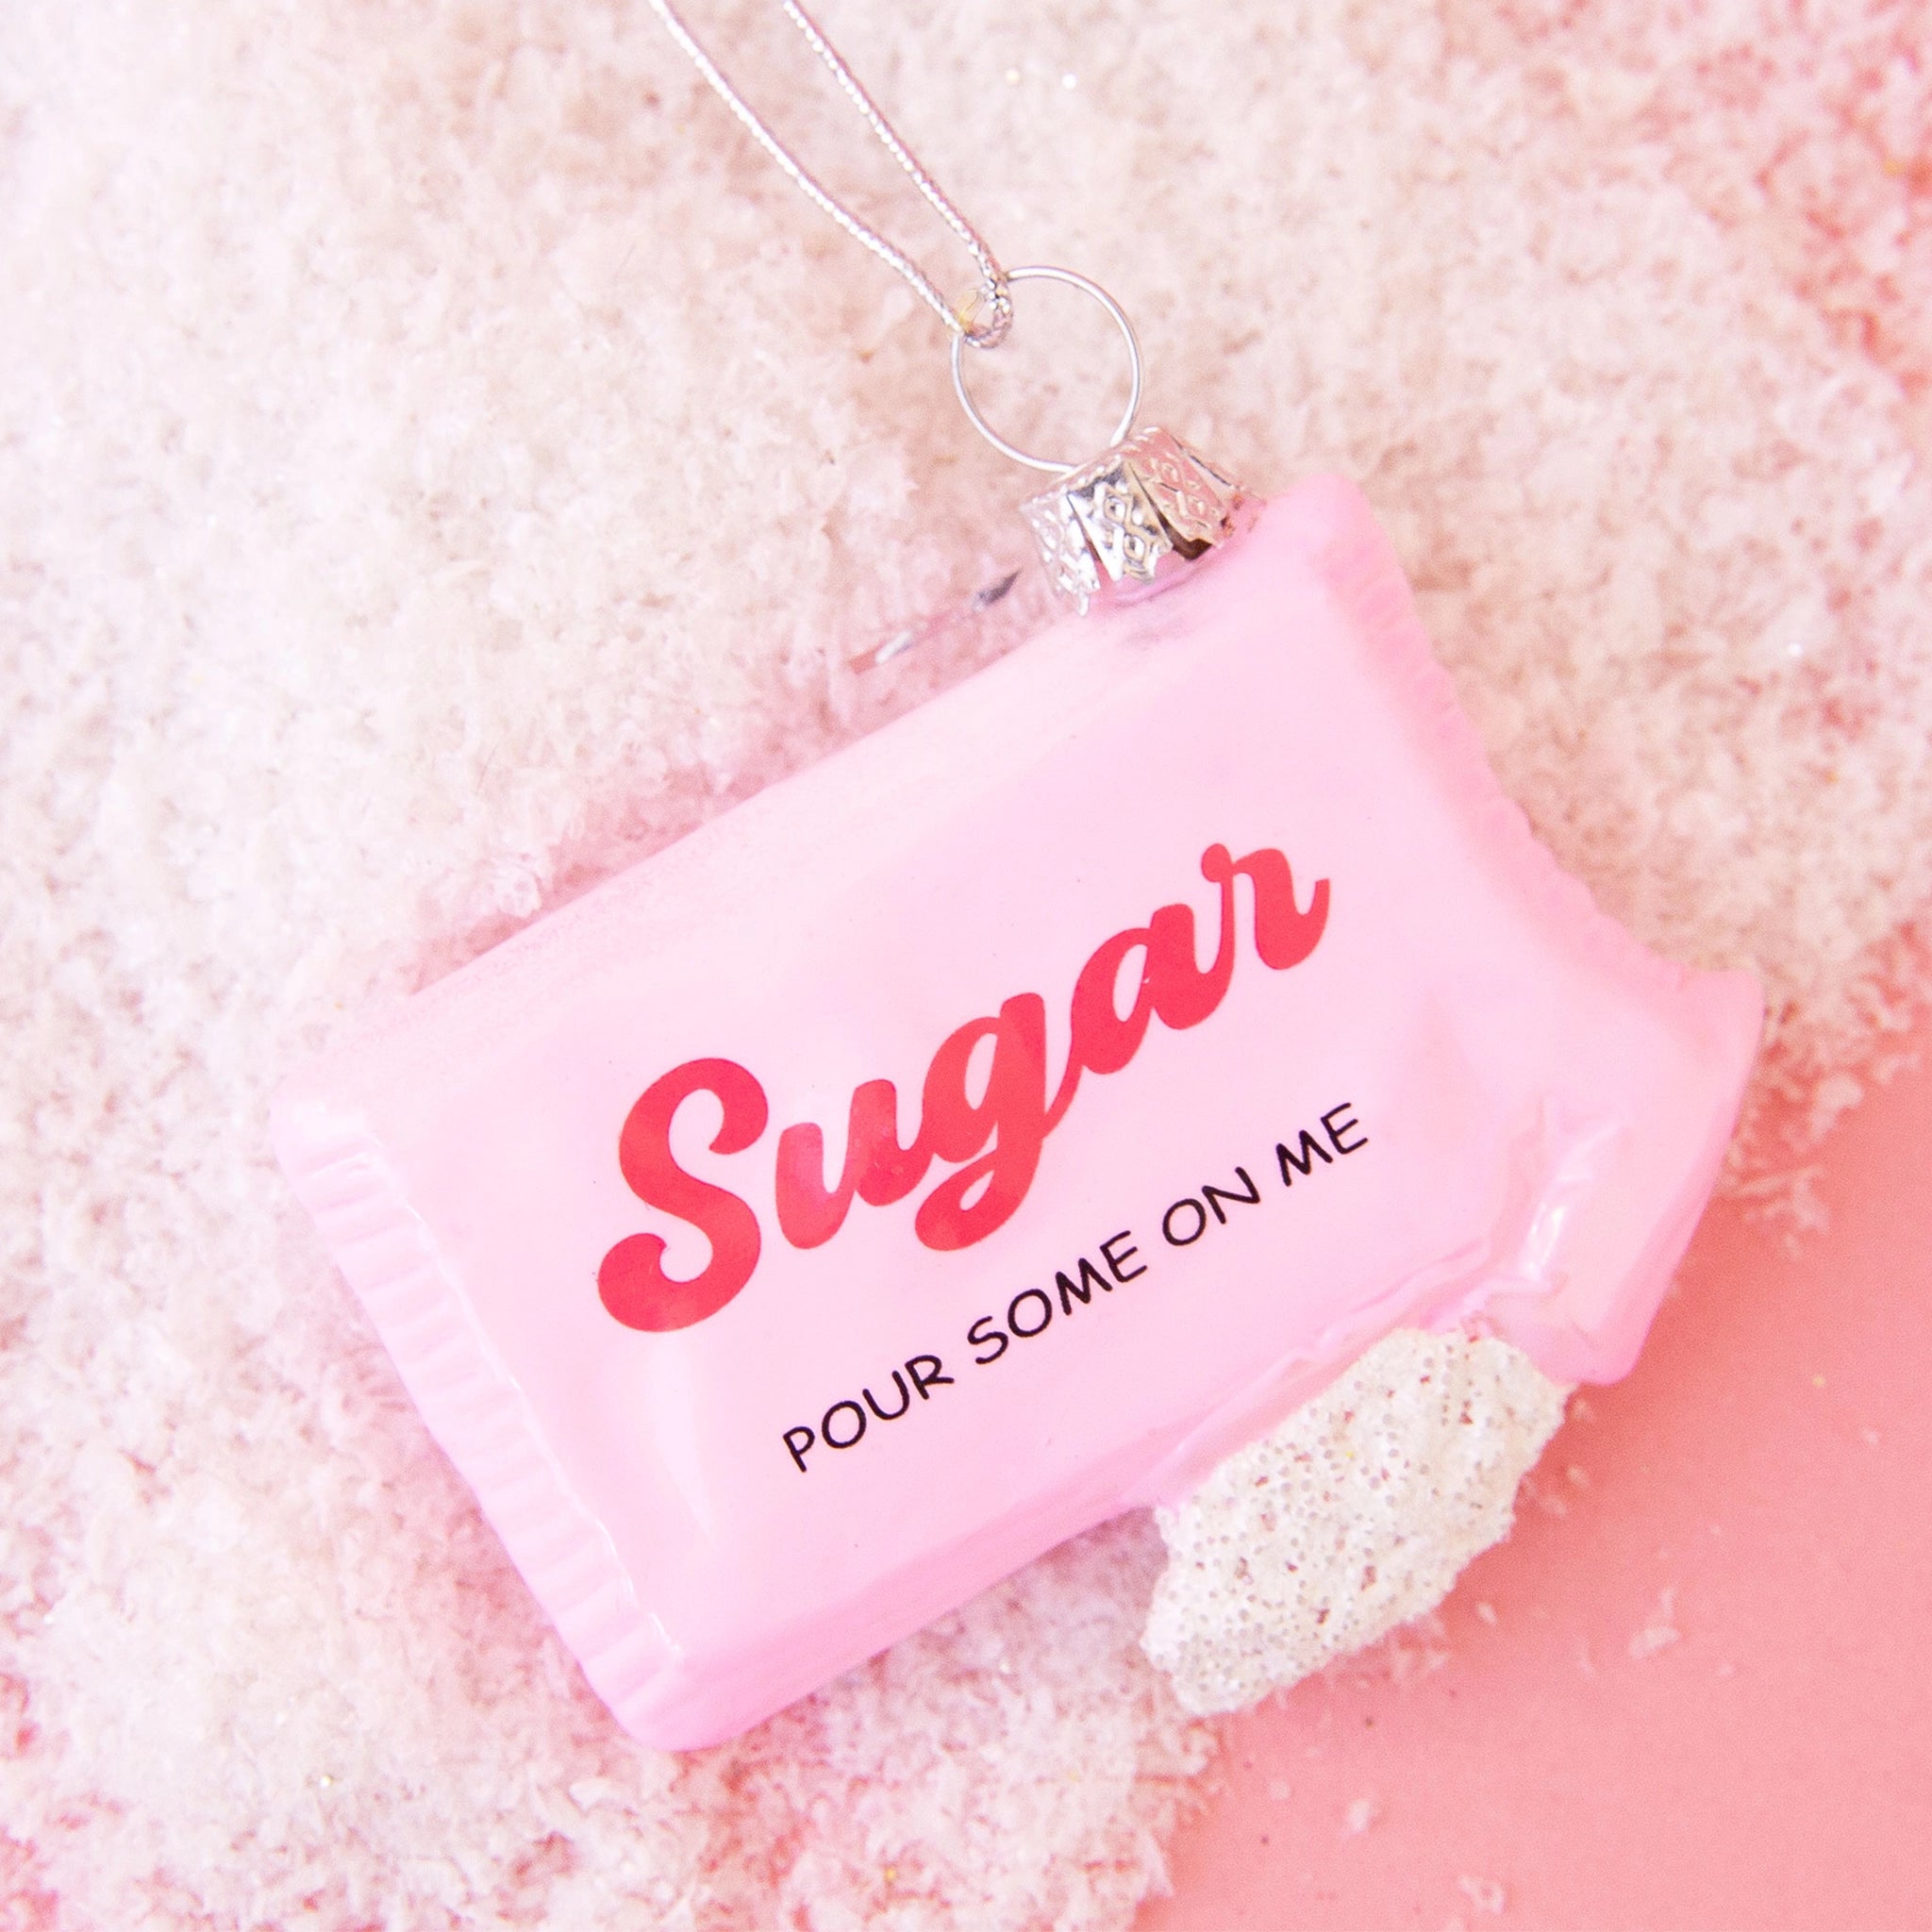 On a pink snowy background is a pink glass ornament in the shape of a sugar packet with hot pink text in the center that reads, "Sugar Pour Some Sugar On Me". 